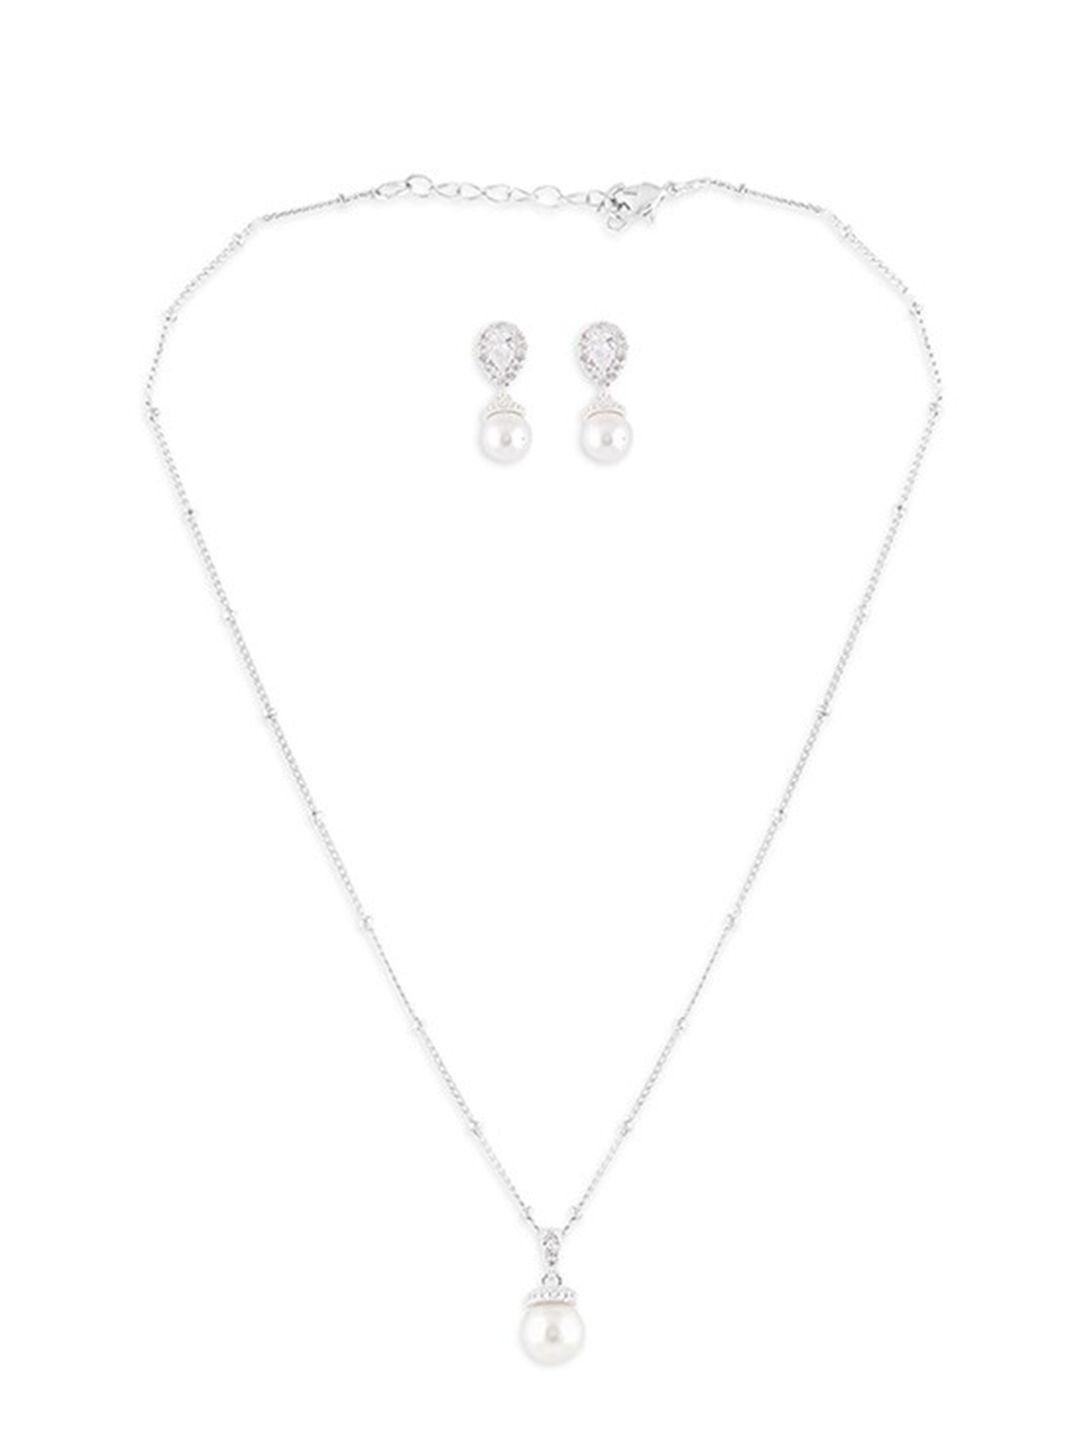 lilly & sparkle rhodium-plated white cz studded & pearl beaded jewellery set